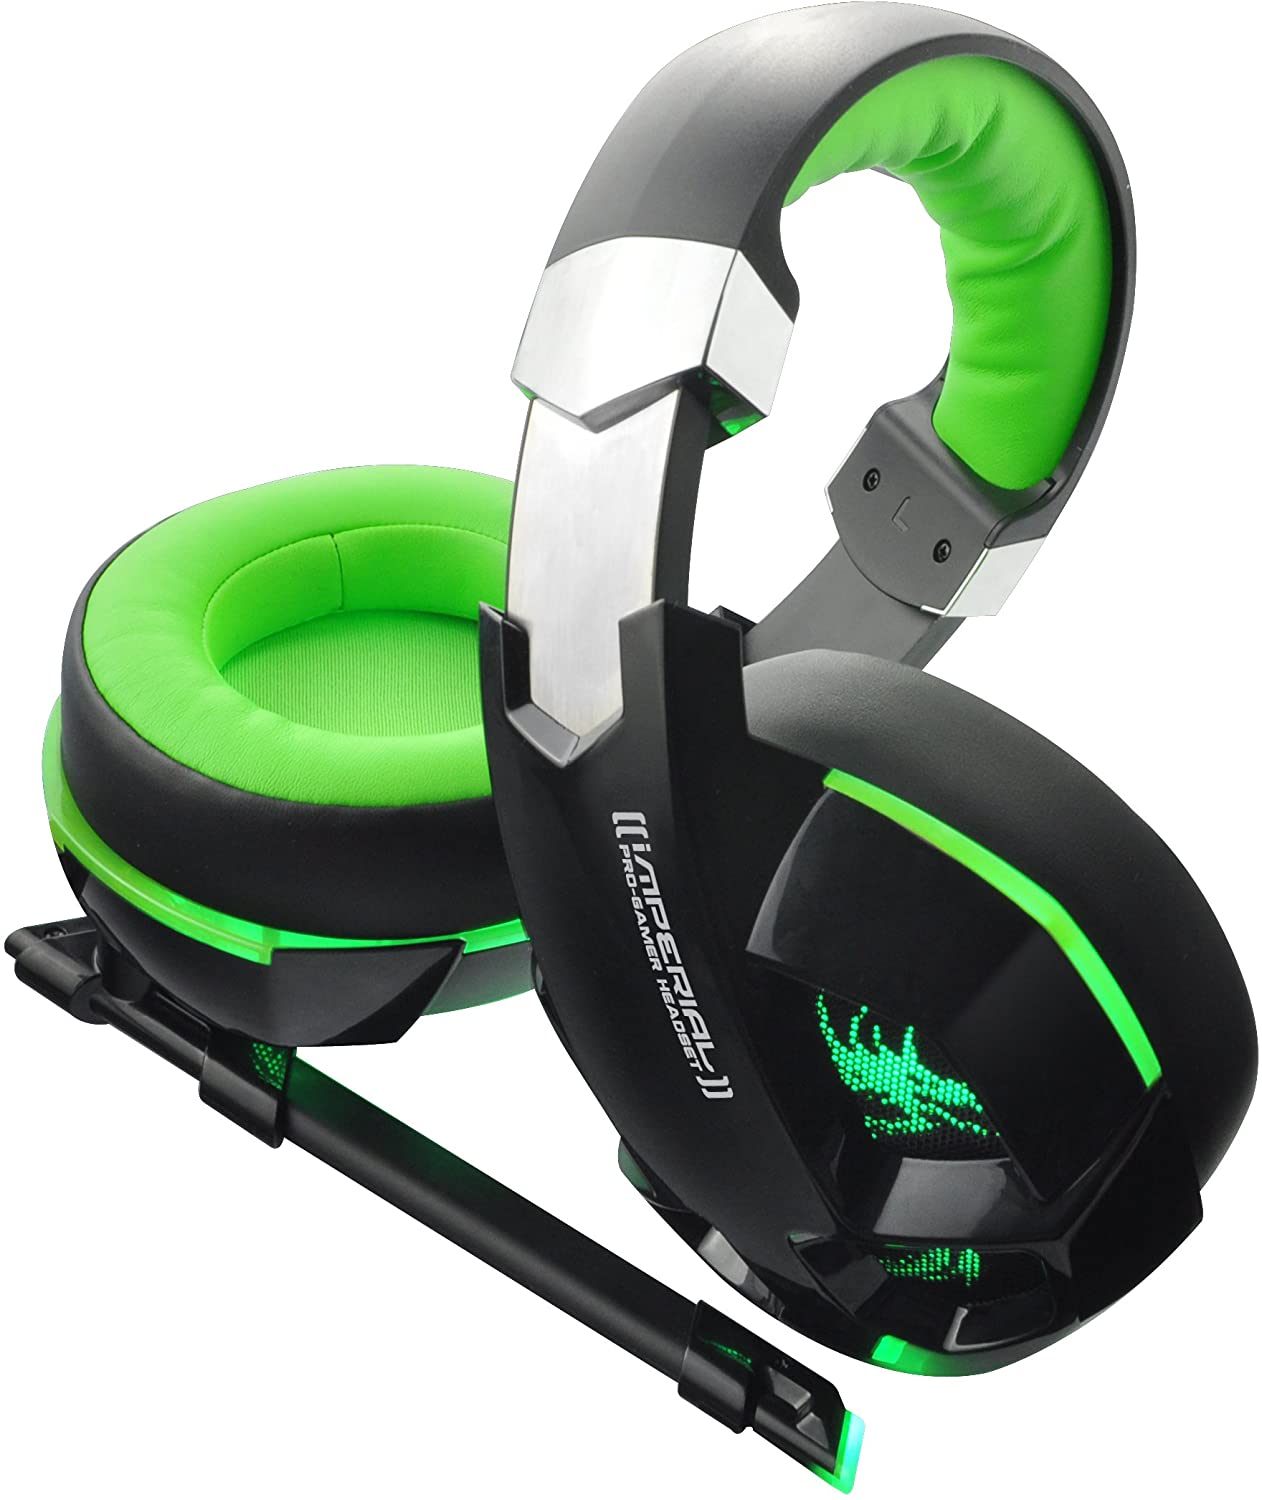 Dragonwar Imperial G-HS-009 Wired Pro Gamer PC Gaming Headset with Noise Cancelling Mic